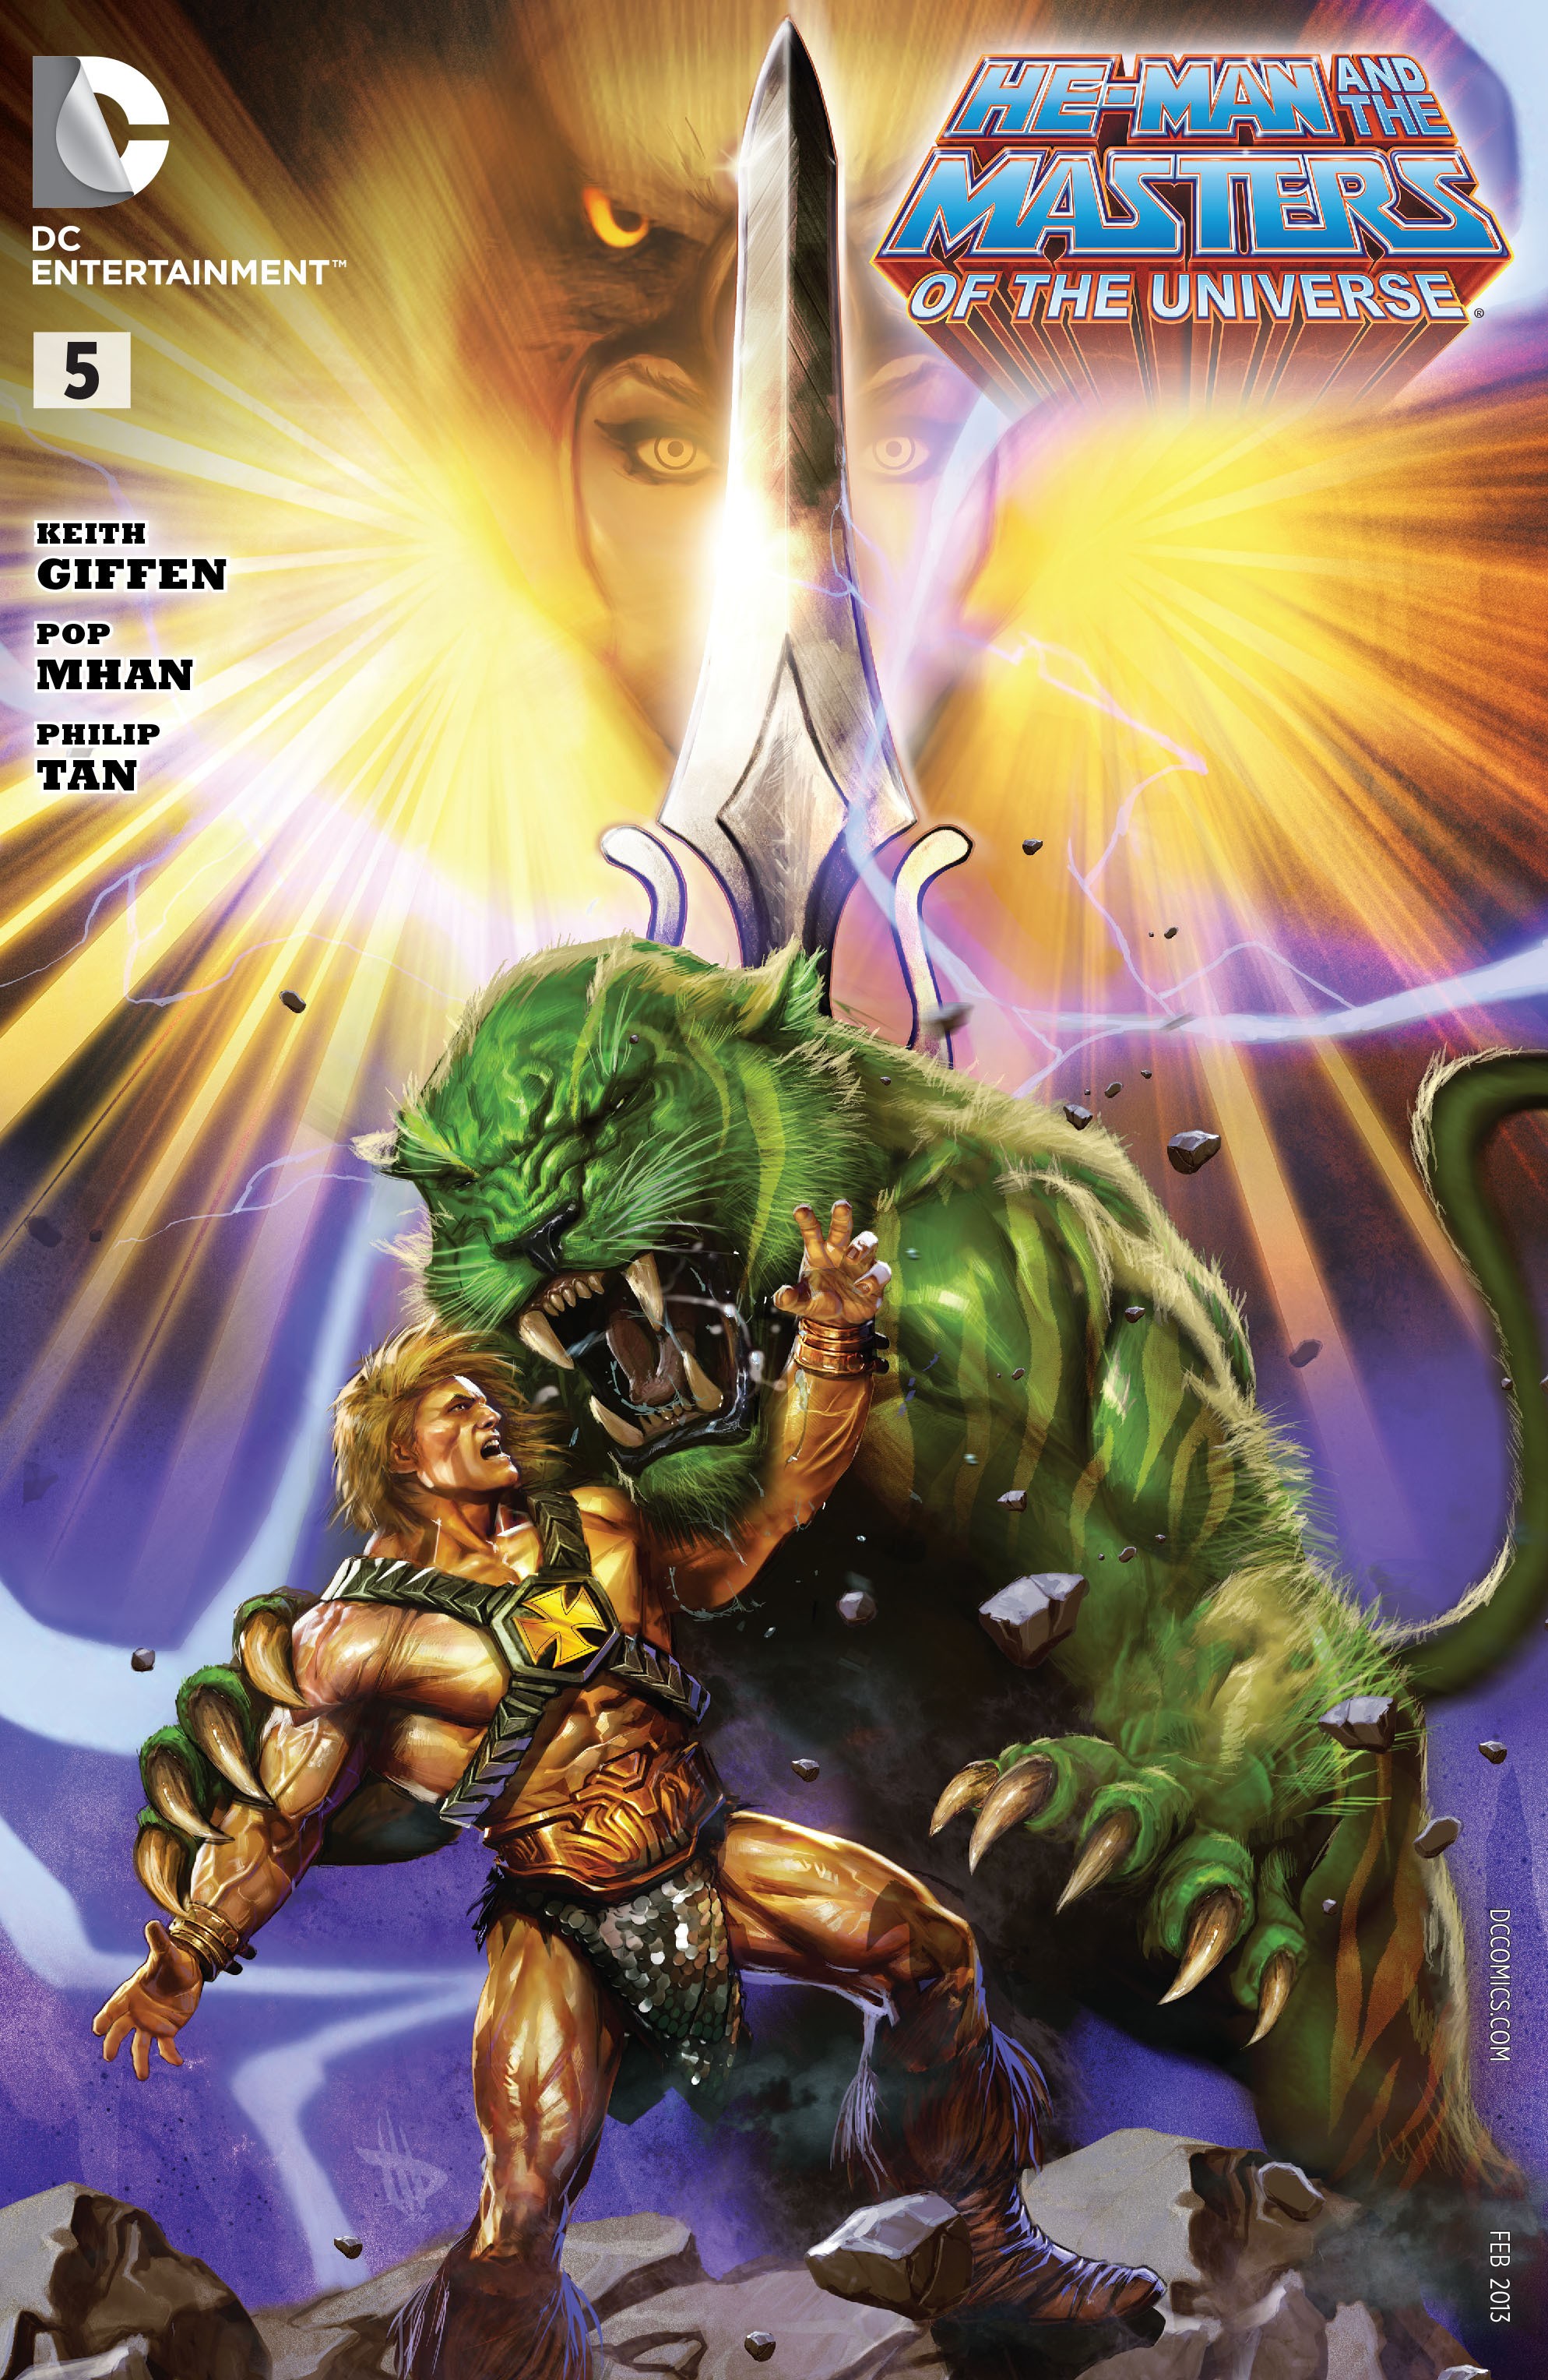 He-Man and the Masters of the Universe Vol. 1 #5